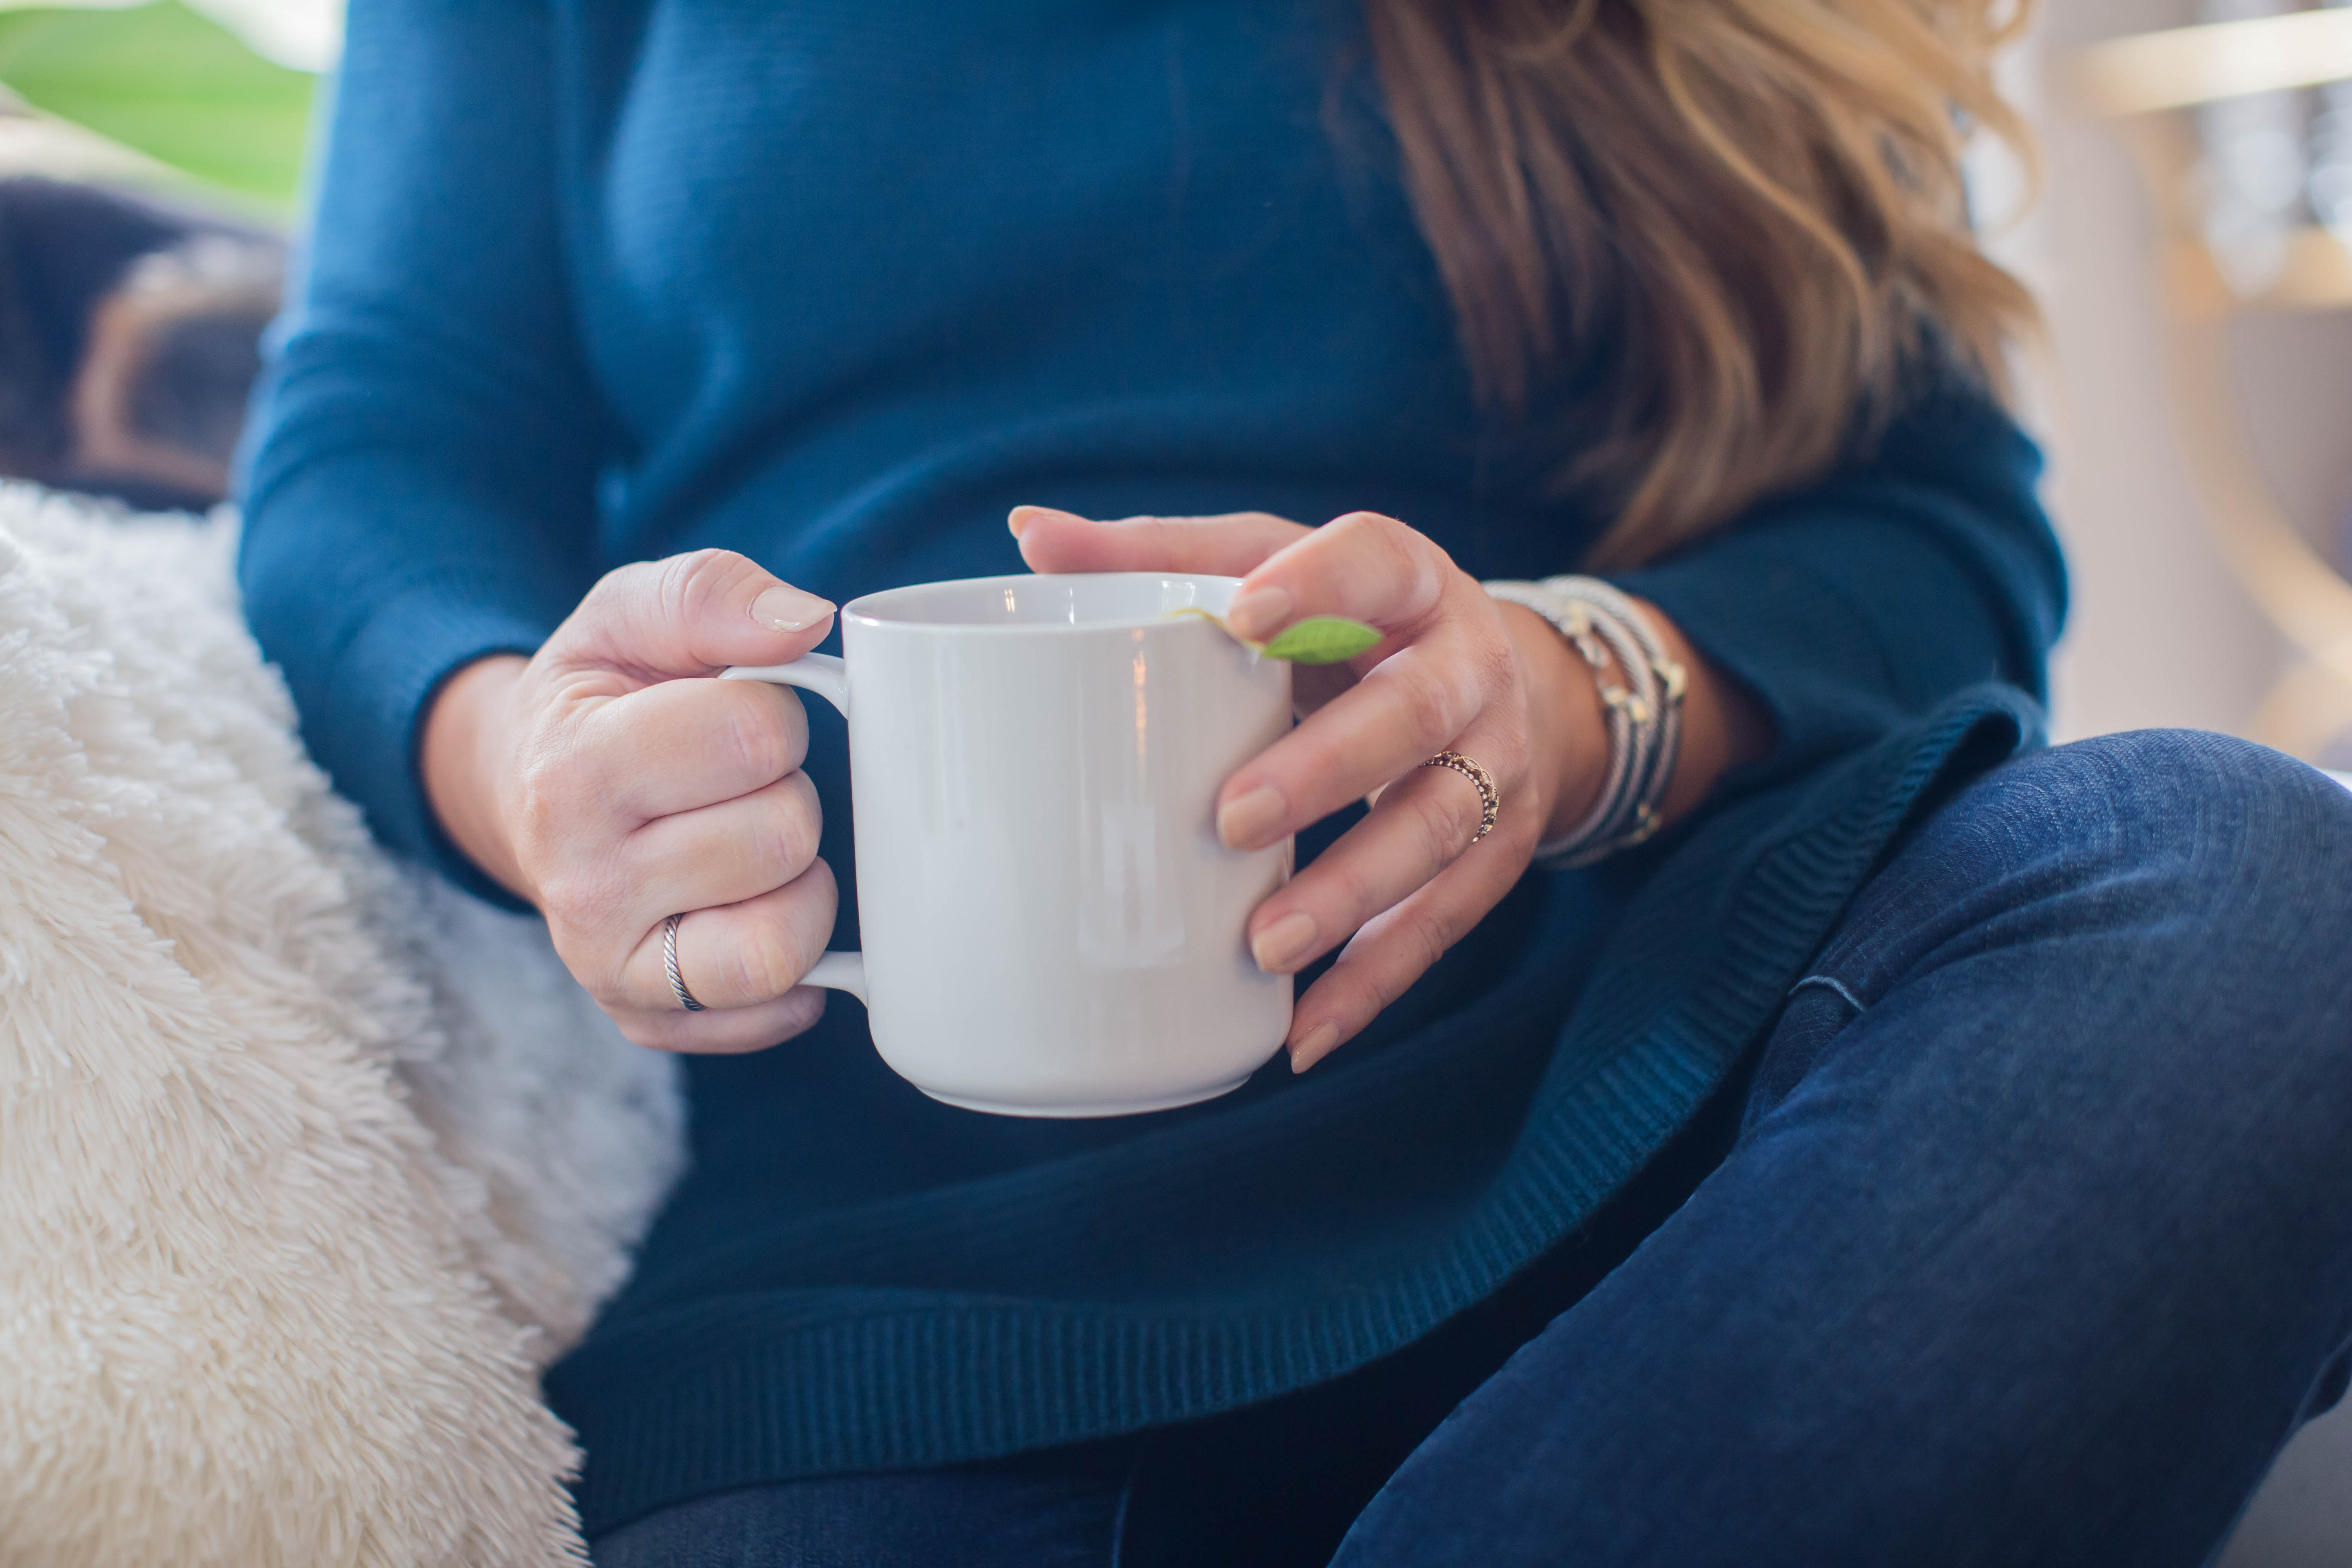 5 Tips for Staying Healthy this Winter - 5 Ways to Stay Healthy this Winter by North Carolina lifestyle blogger Coffee Beans and Bobby Pins